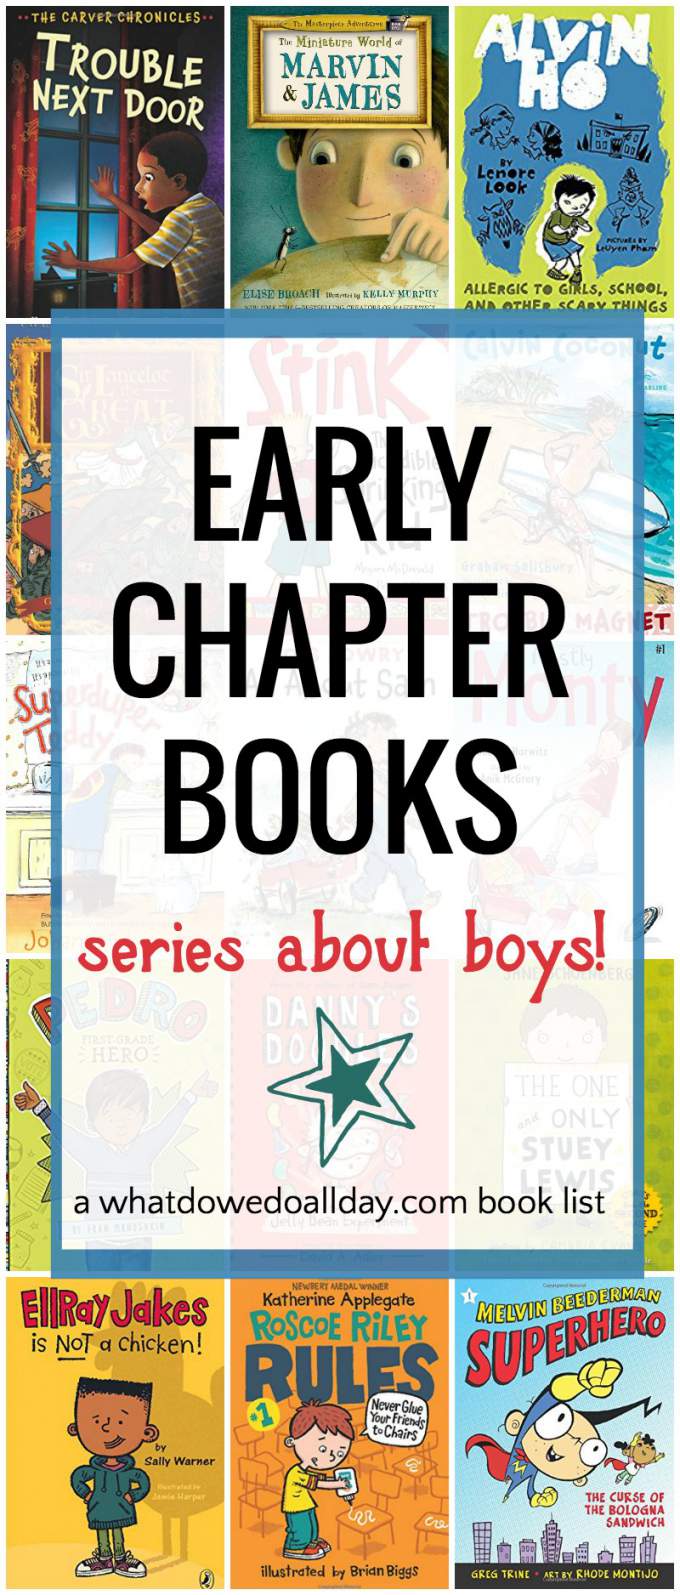 Best early chapter books series about boys for kids ages 6-10